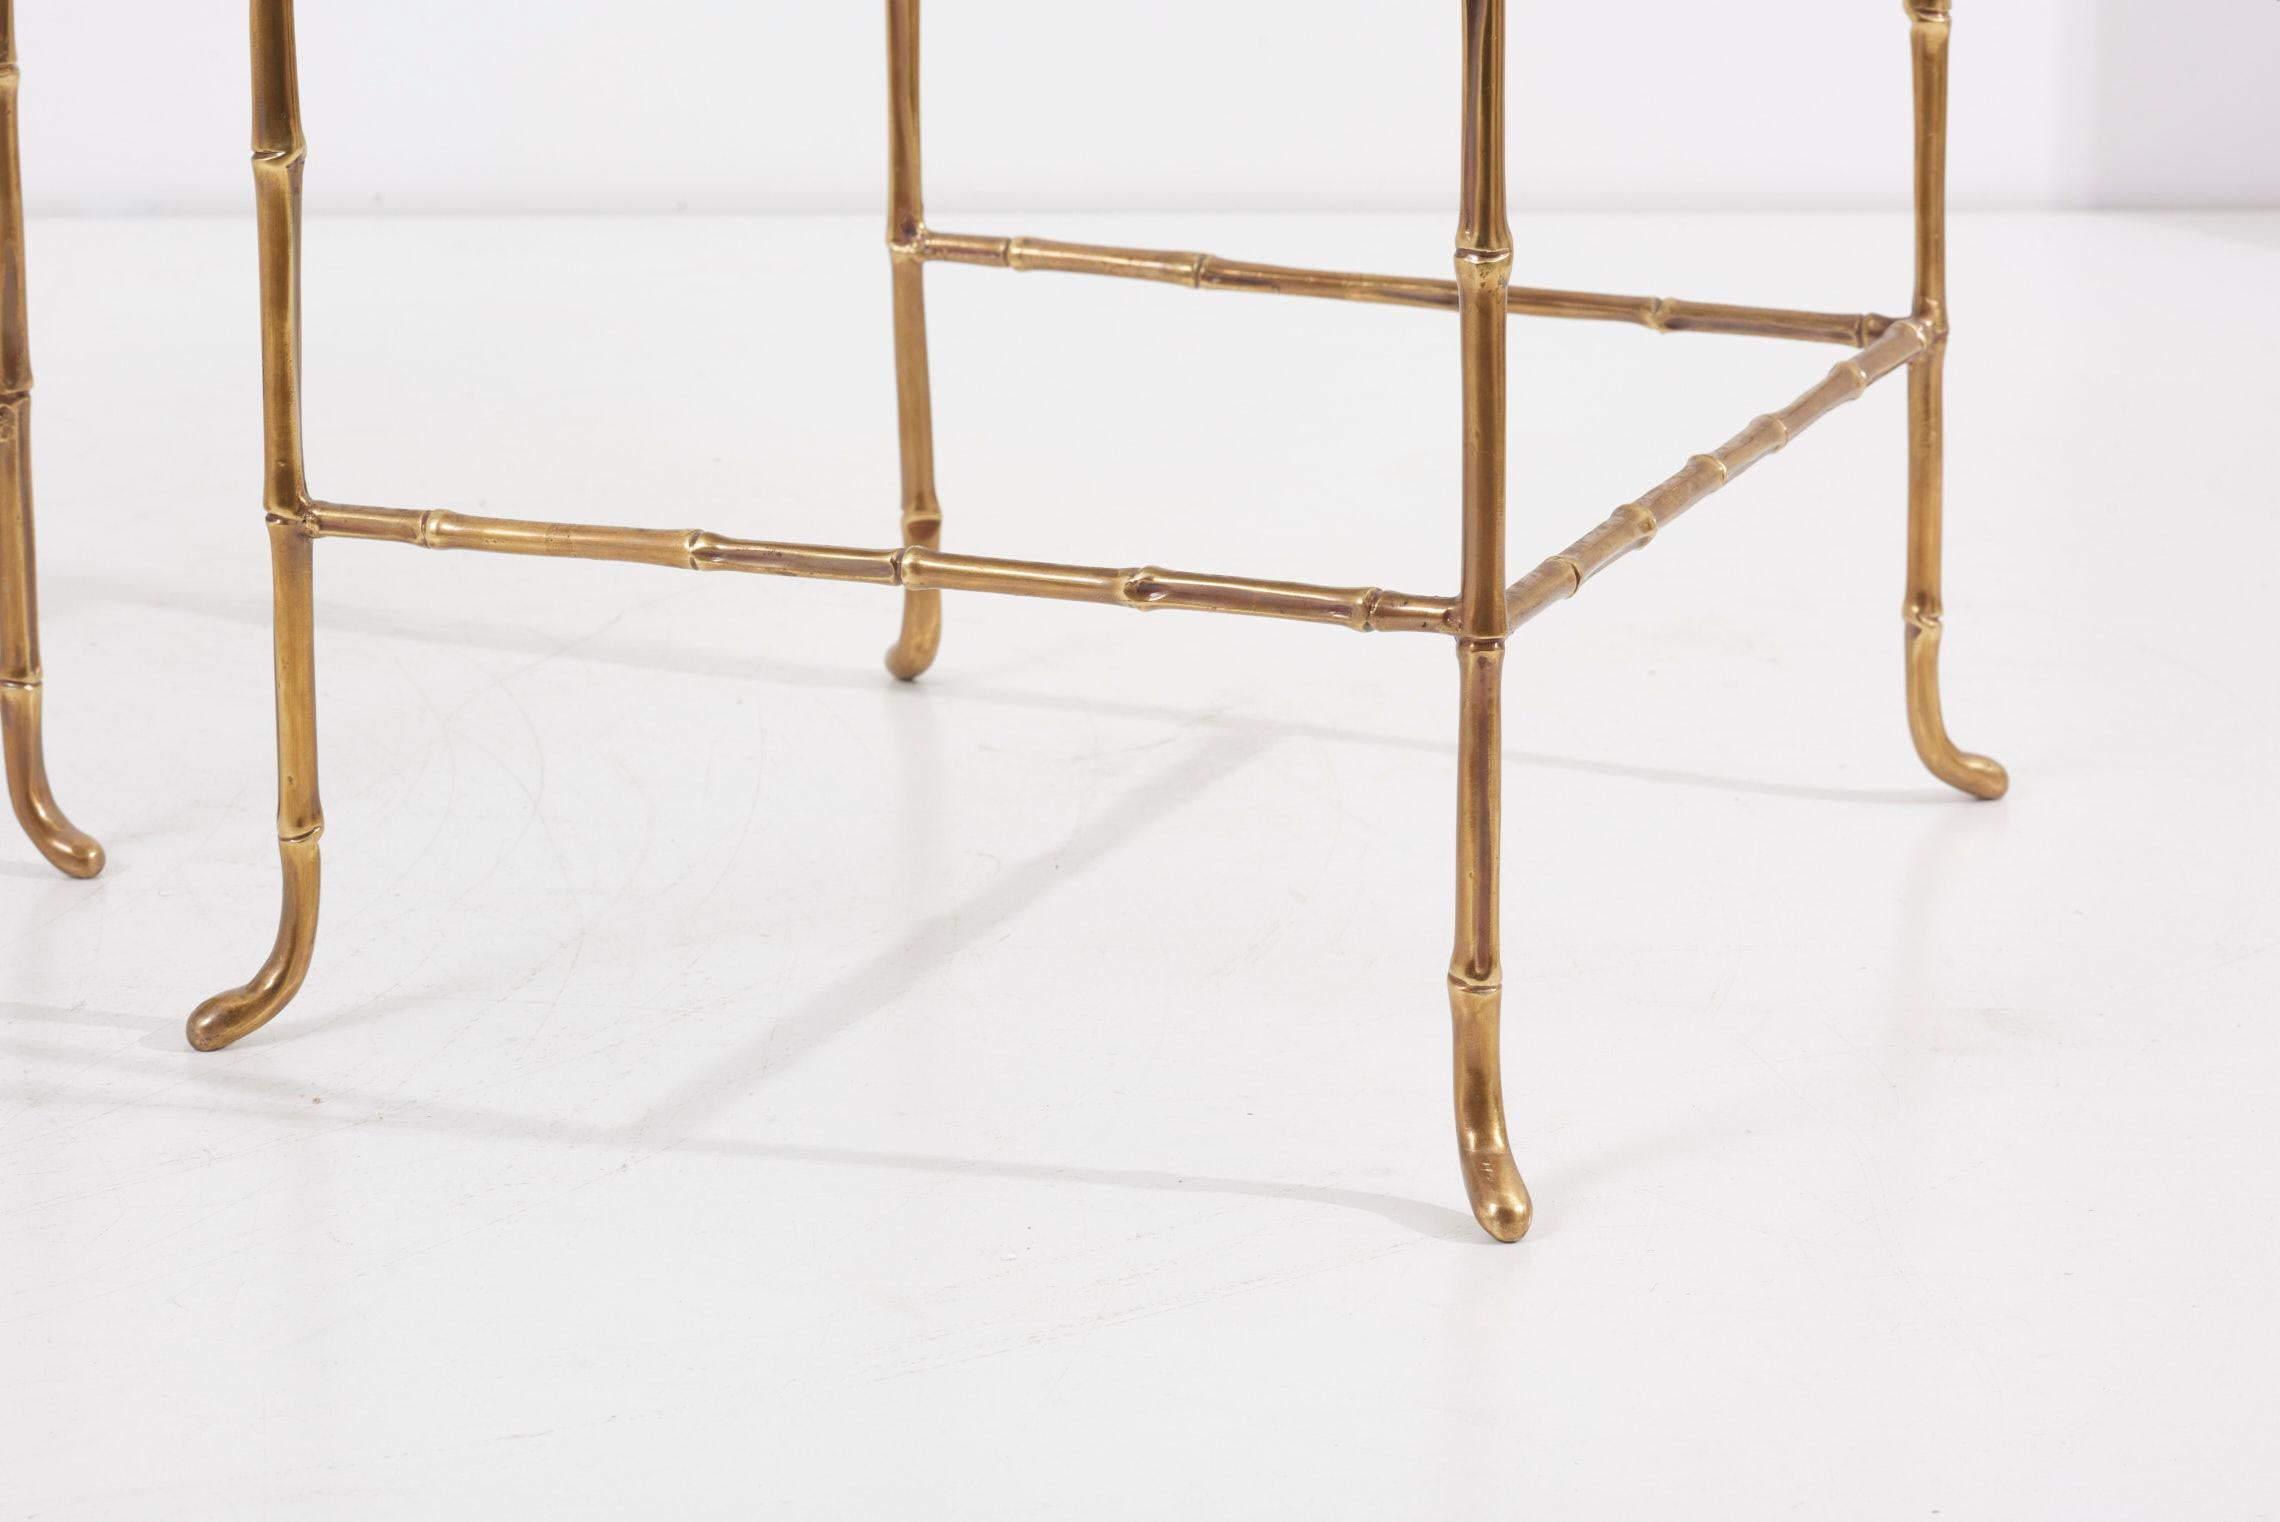 20th Century Set of 3 Bronze Bamboo Nesting Tables with Mirrors by Maison Baguès, France For Sale